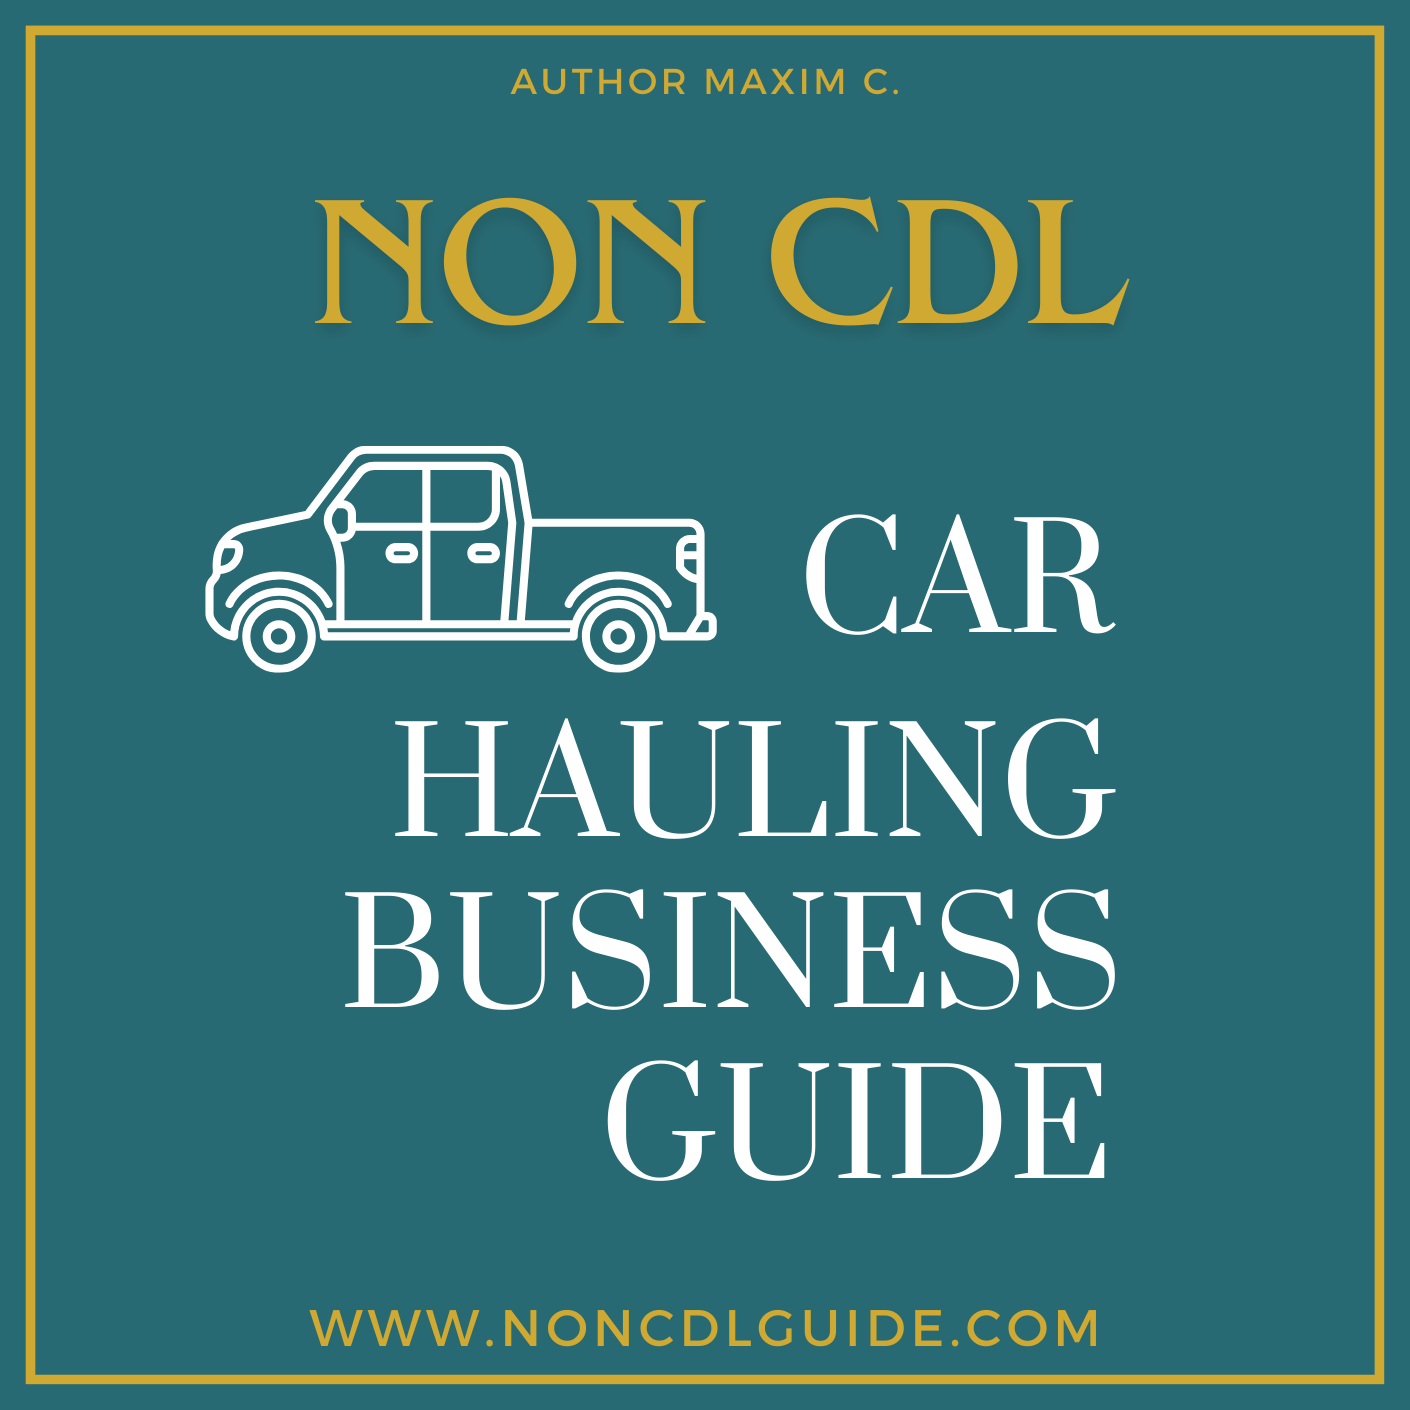 NON CDL car hauling business GUIDE